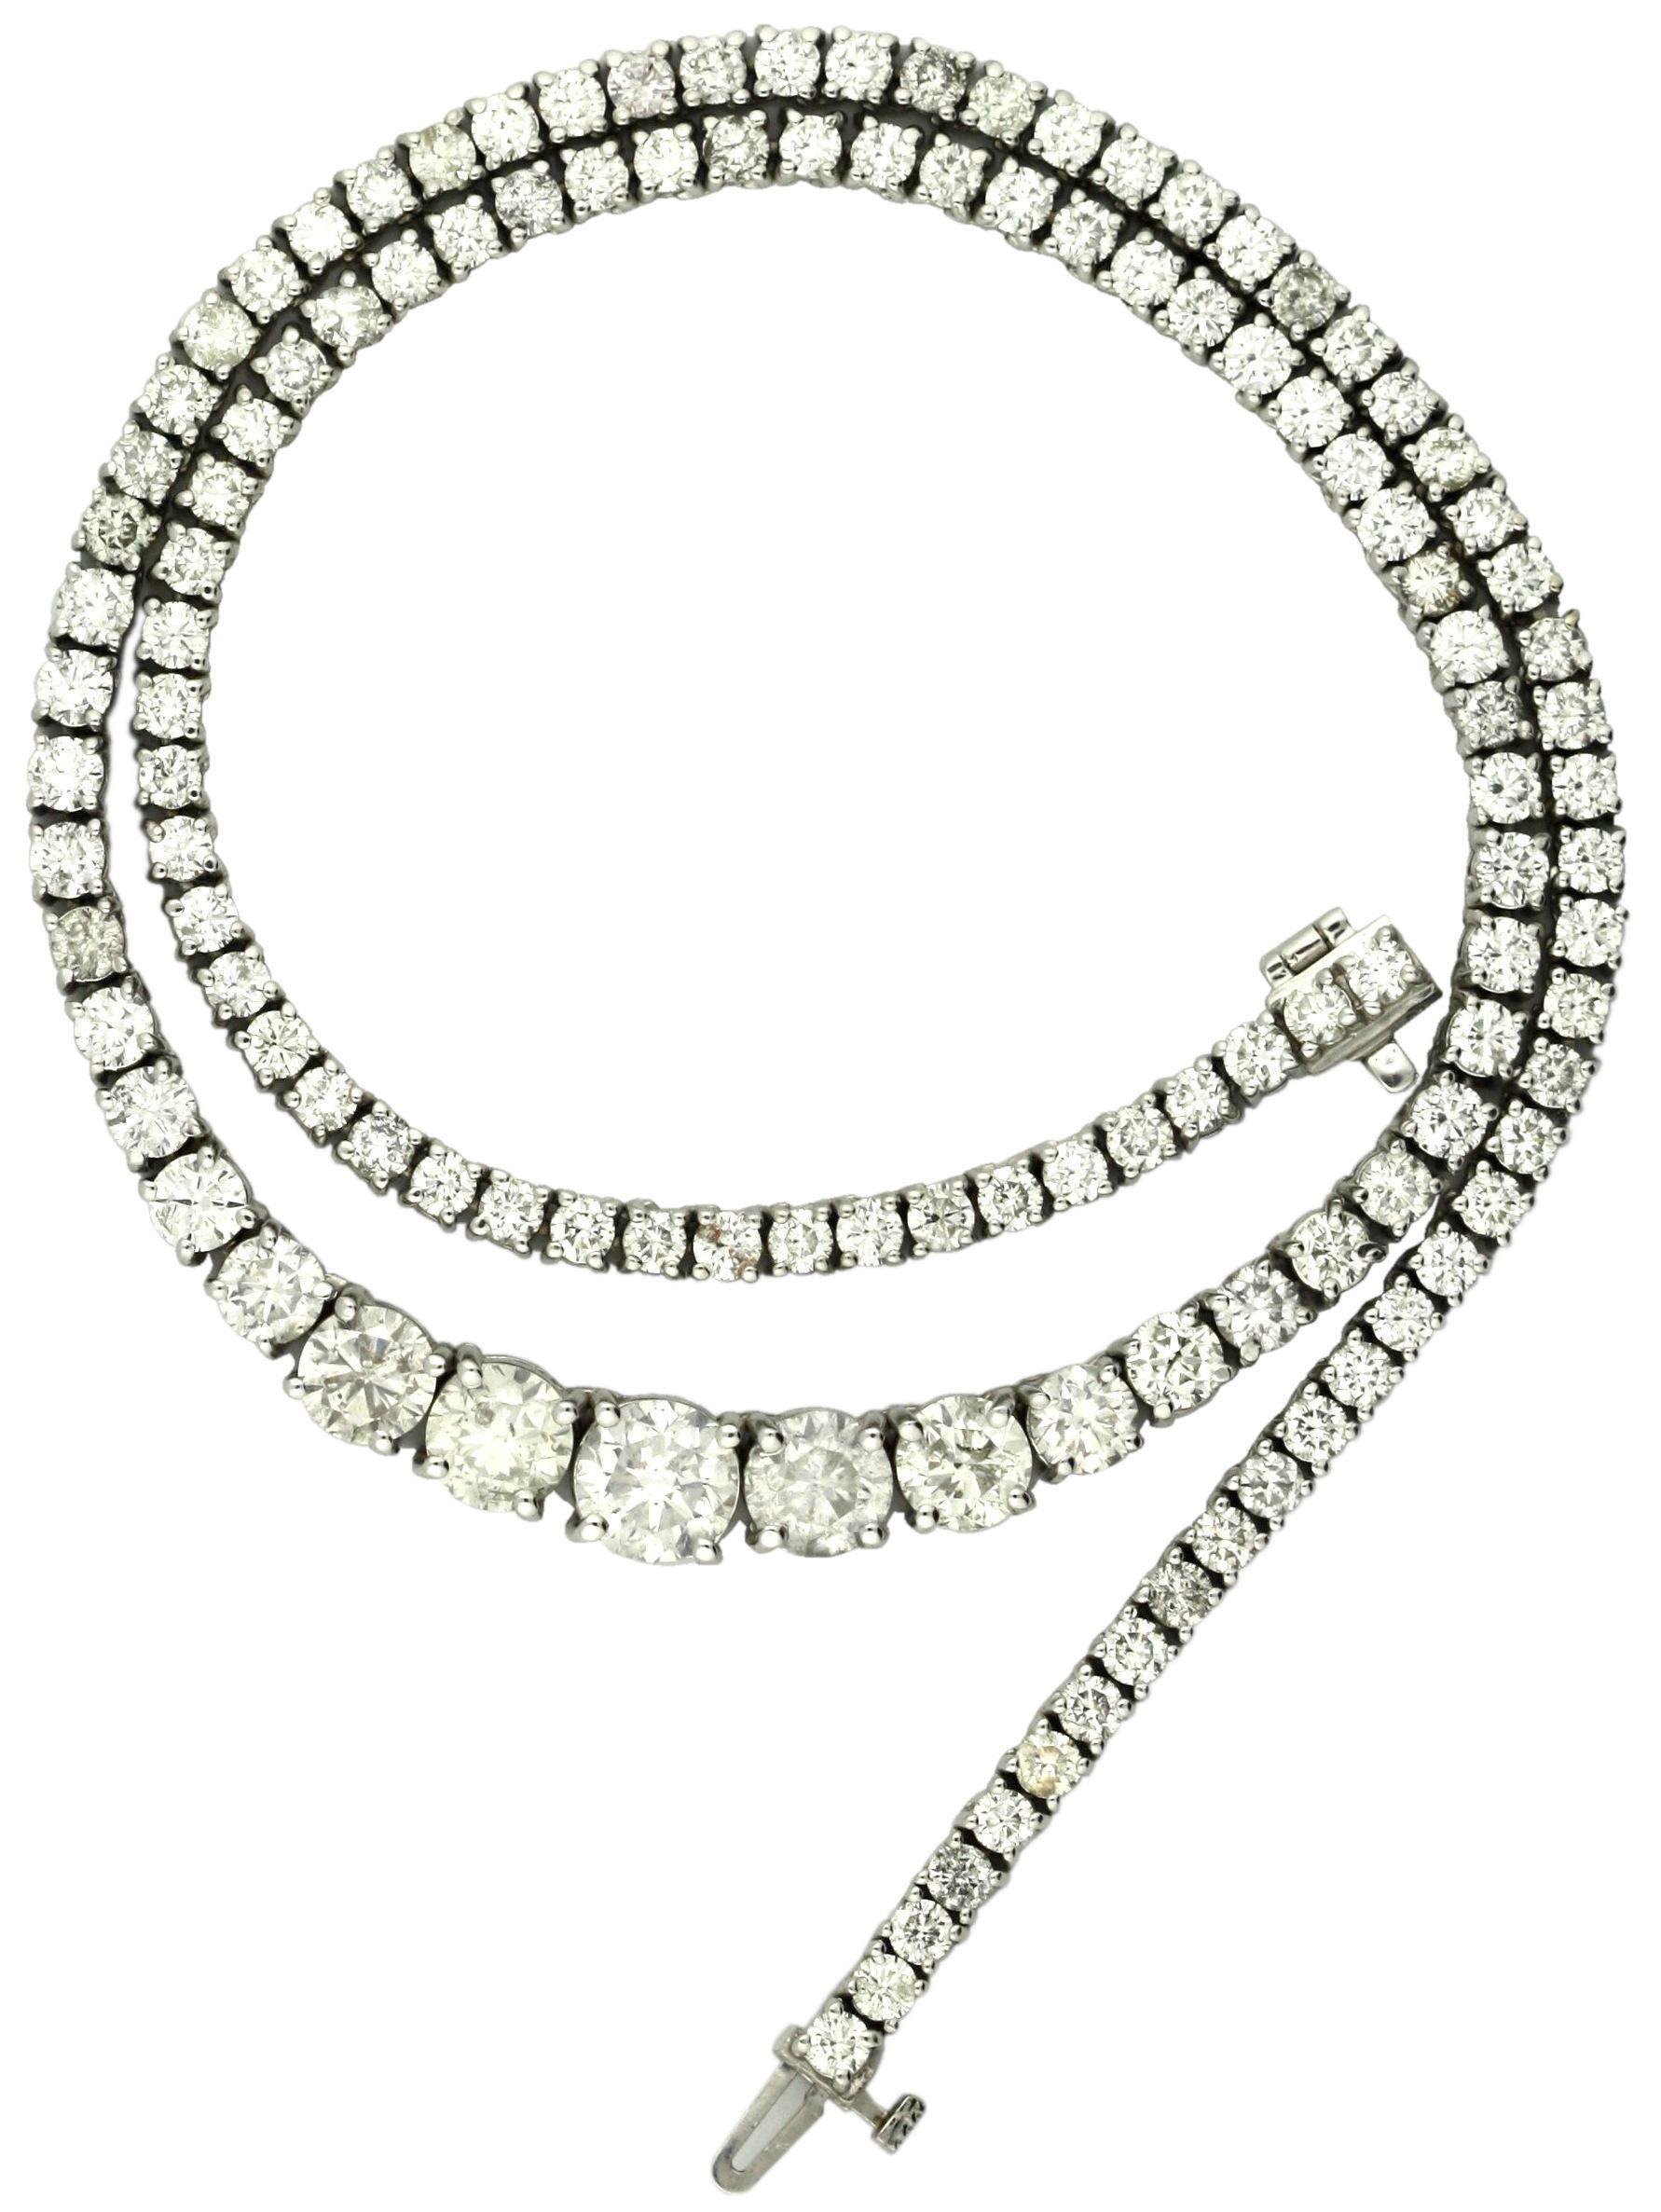 Oscar Friedman Diamond Necklace 
Featuring Two hundred twenty-two round, brilliant cut diamonds weighing approximately 19.67 carats and measuring approximately 7.34 - 7.38 x 4.71 mm, graduating to a centered round brilliant-cut diamond weighing